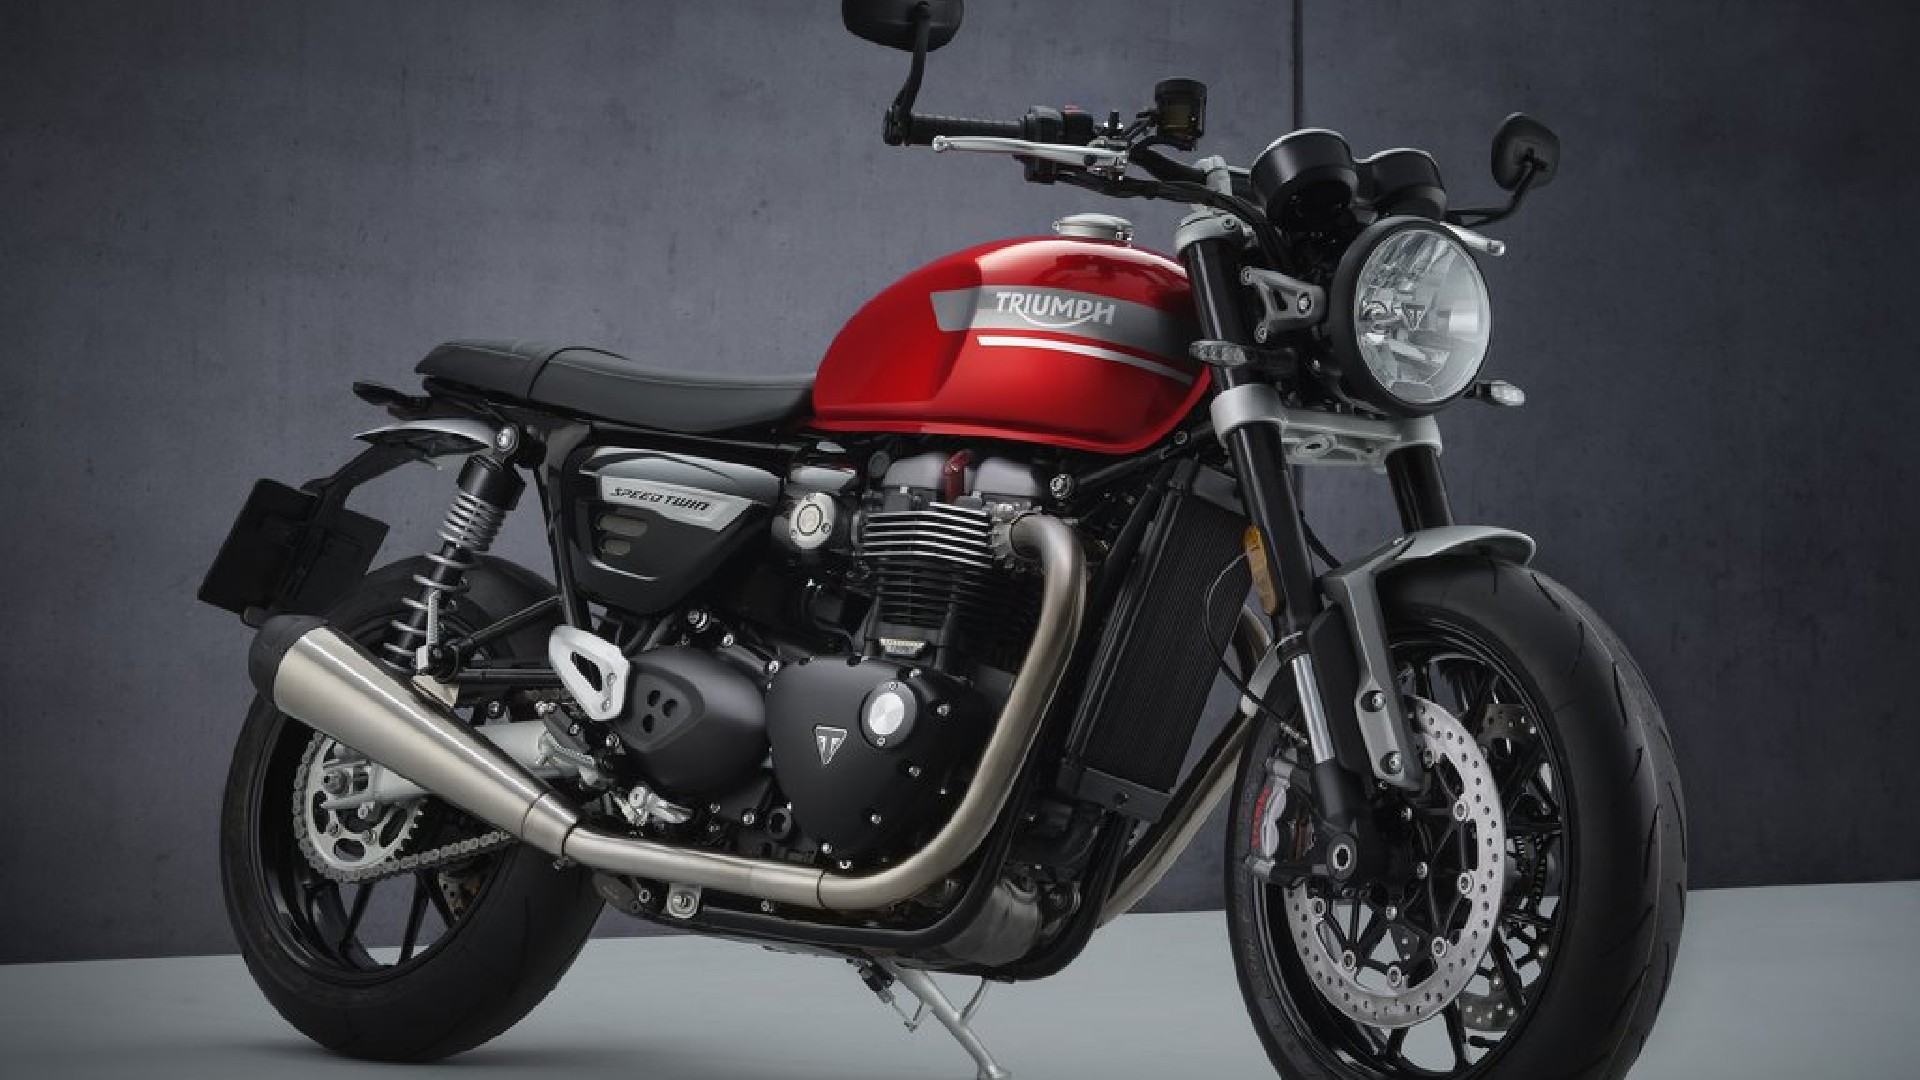 2021 Triumph Speed Twin Unveiled With More Power & Poise